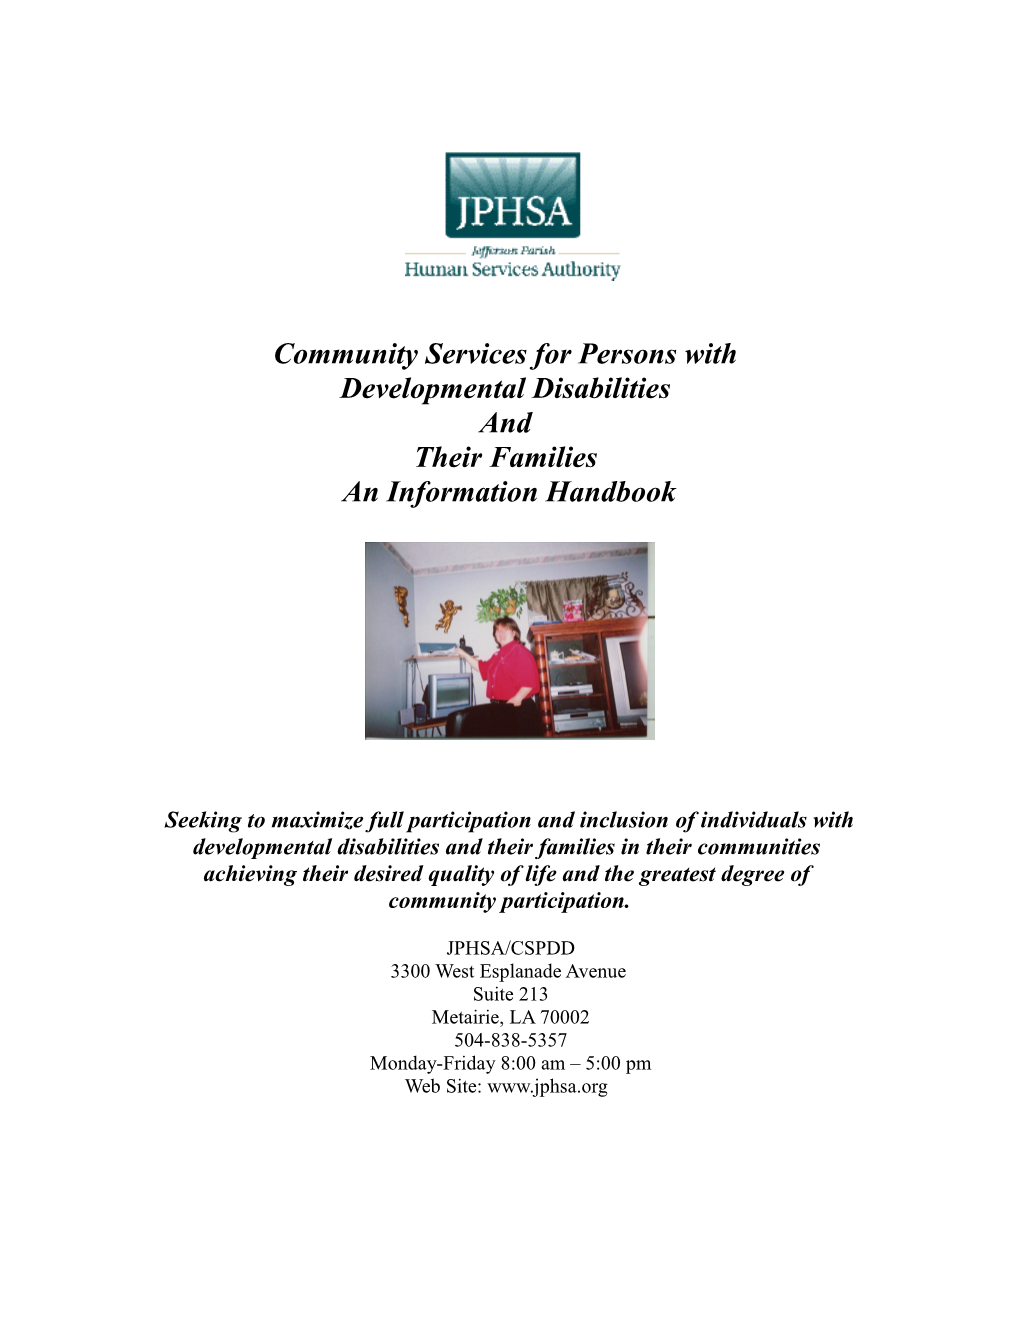 Community Services for Persons With